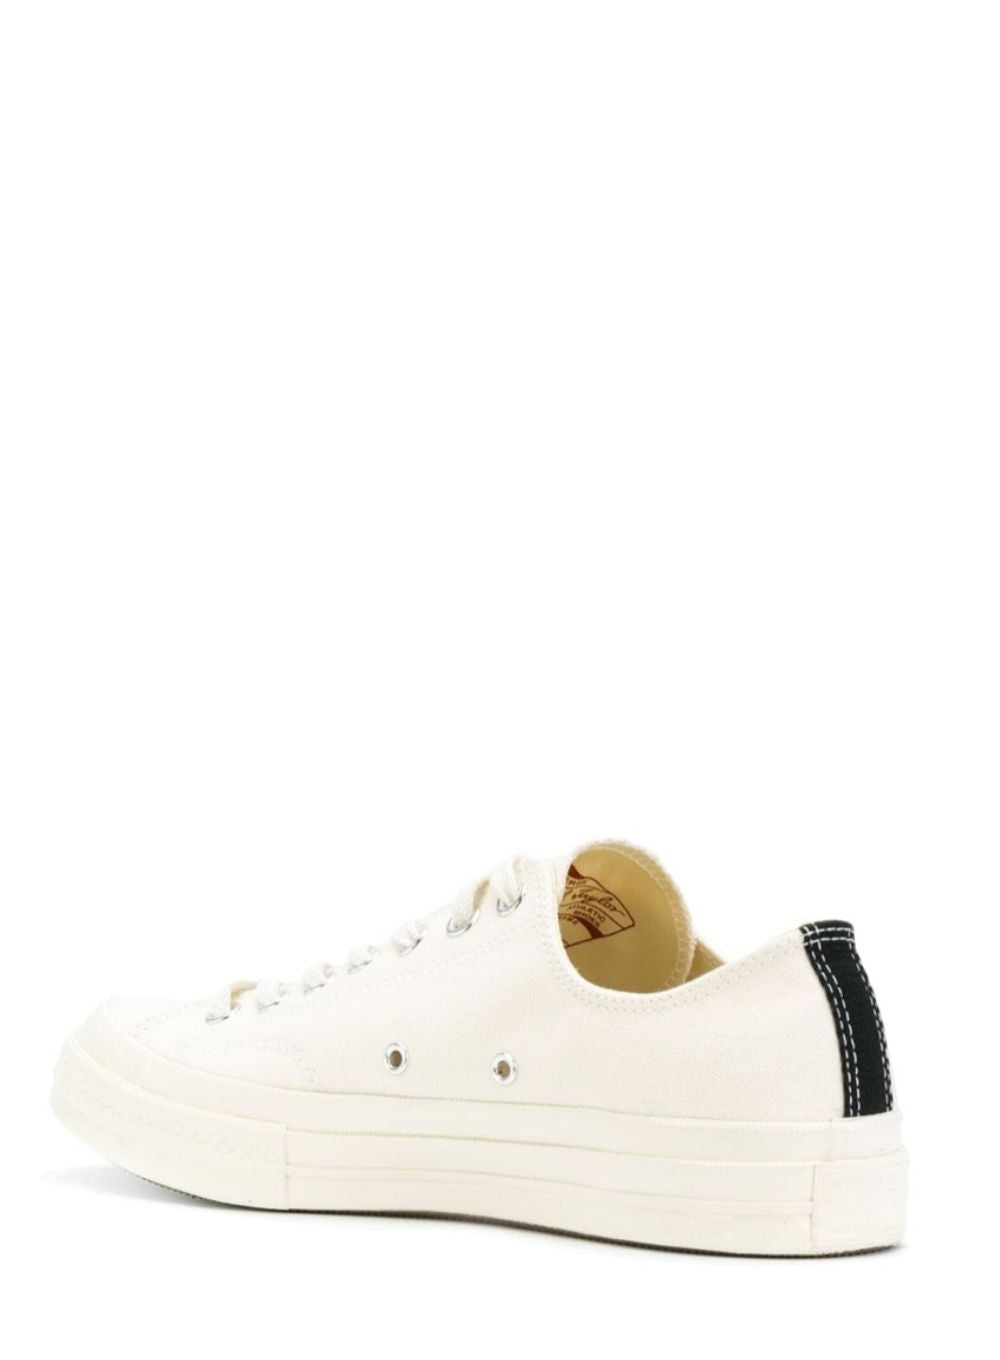 COMME DES GAR ONS PLAY x CONVERSE | Chuck Taylor '70 LOW-Top Sneaker